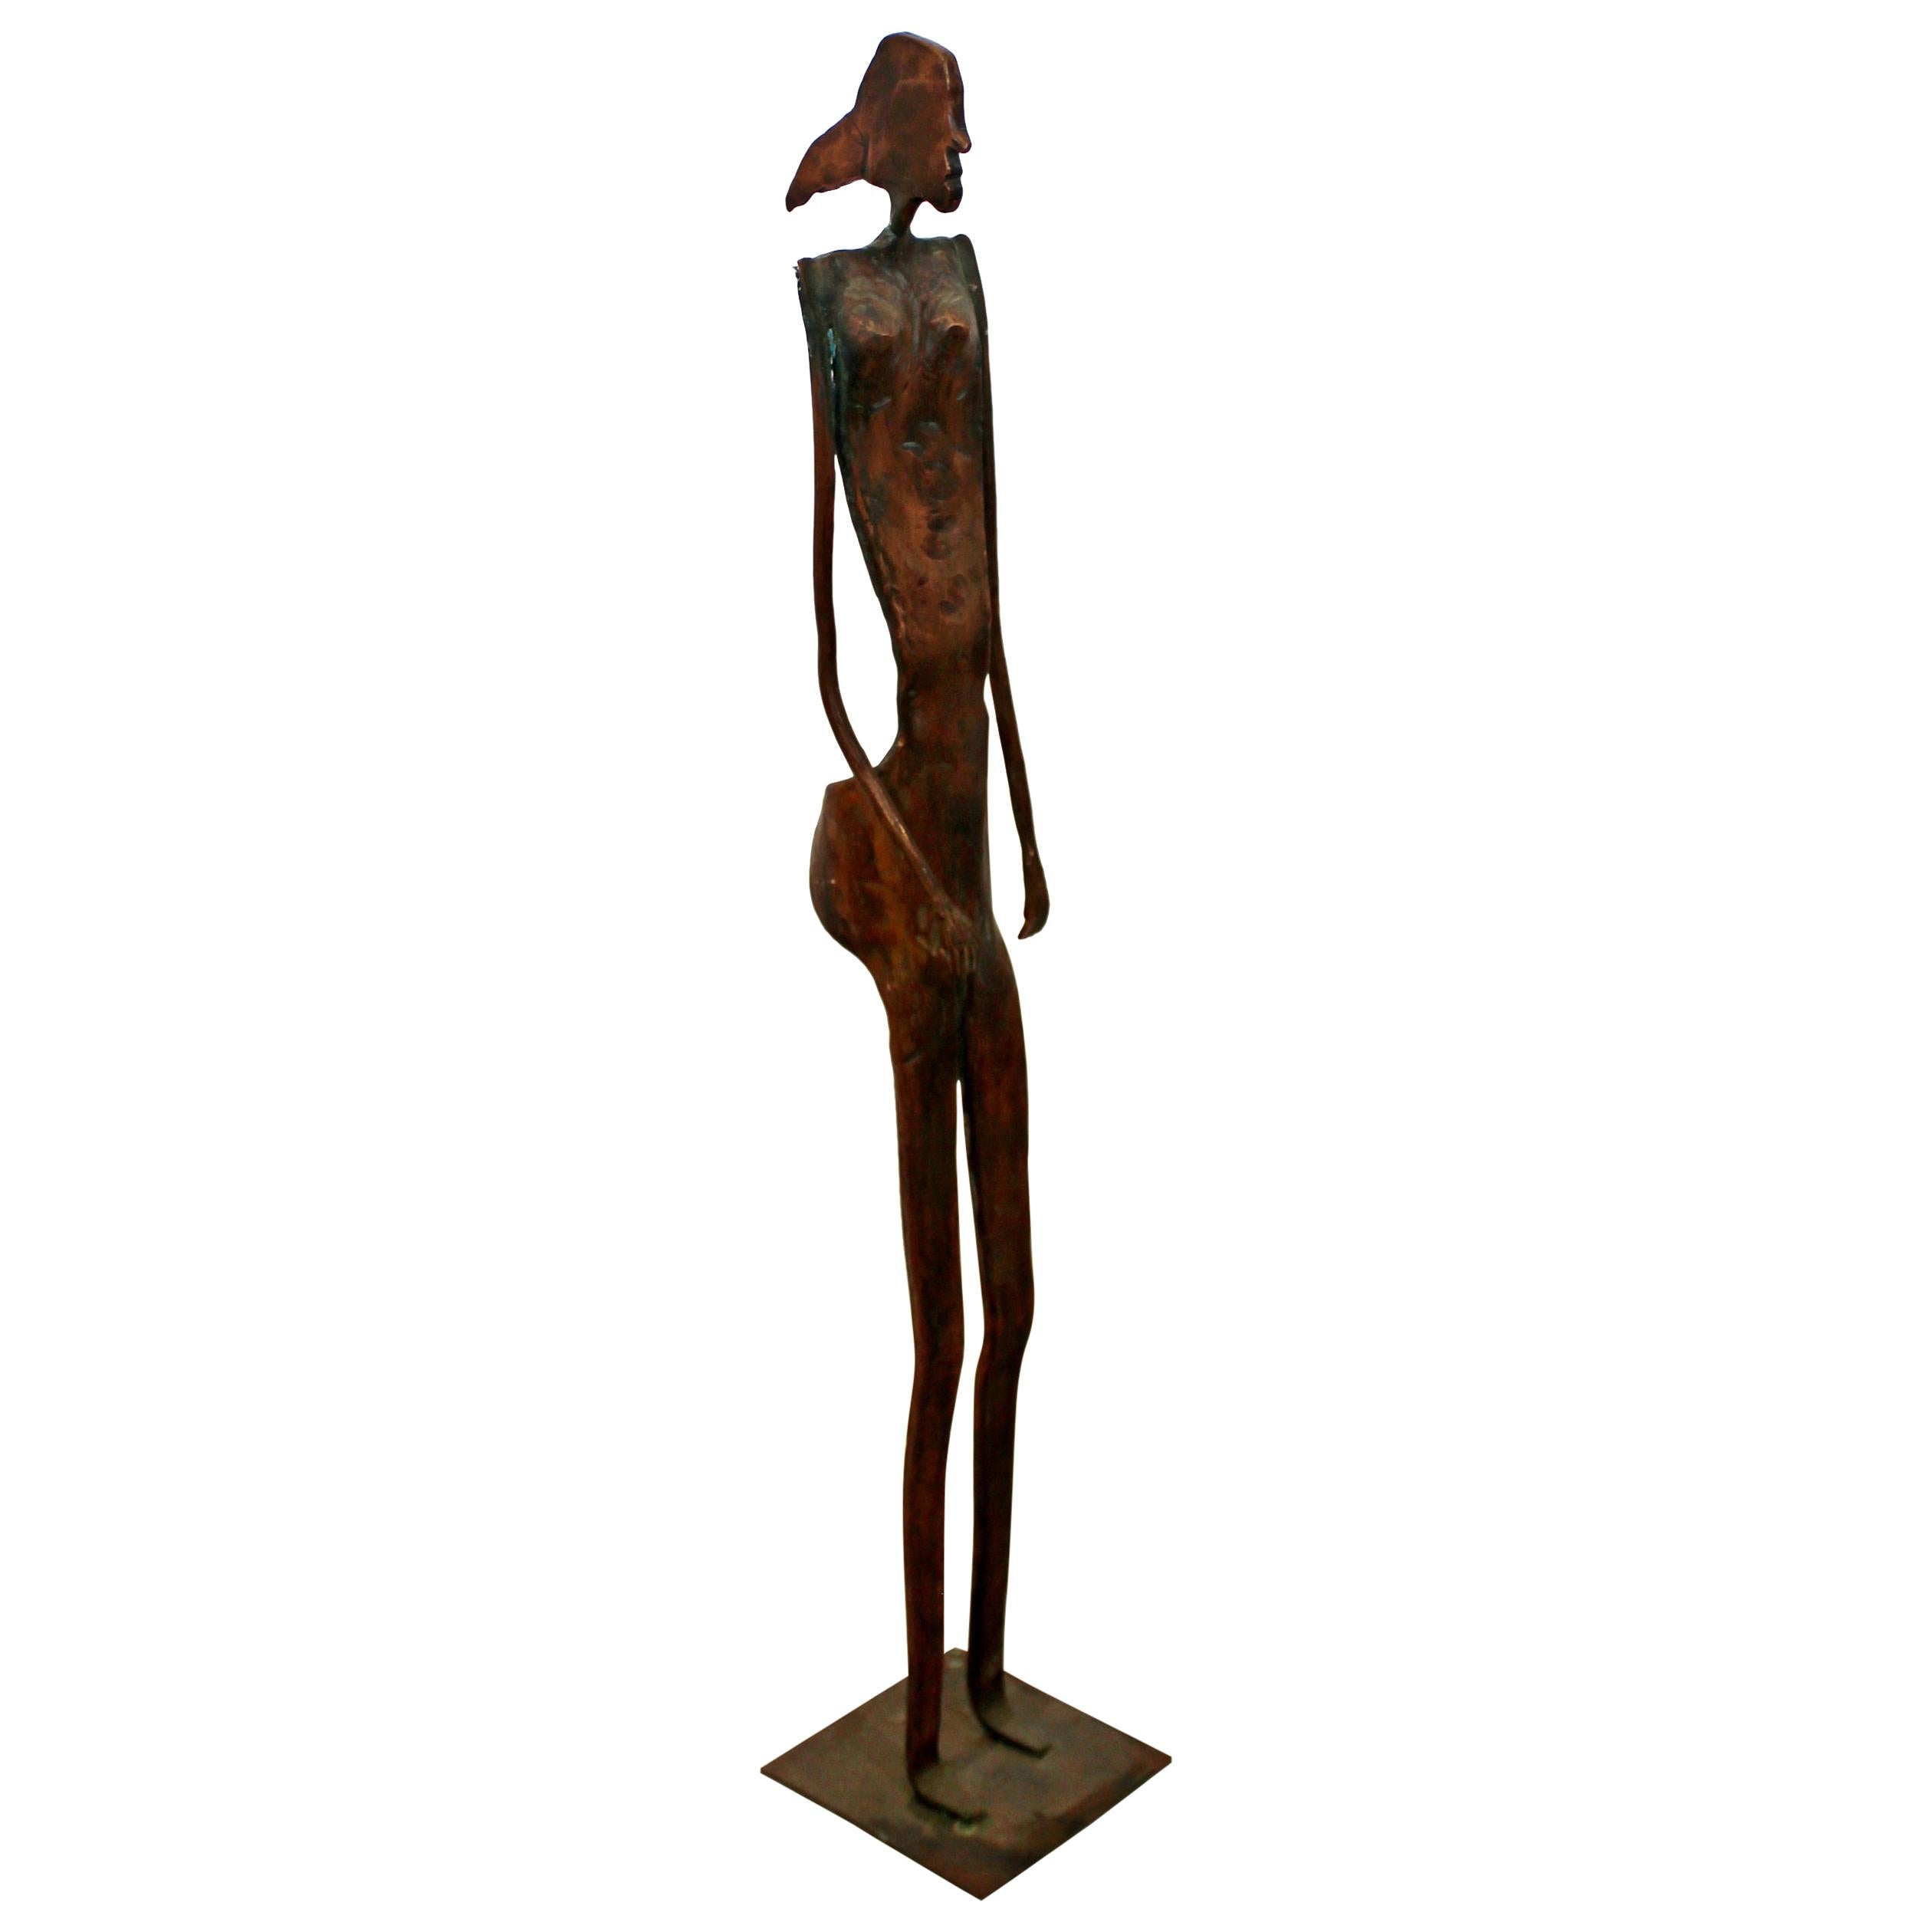 Contemporary Forged Copper Female Nude Figure Table Sculpture Signed Hansen 2001